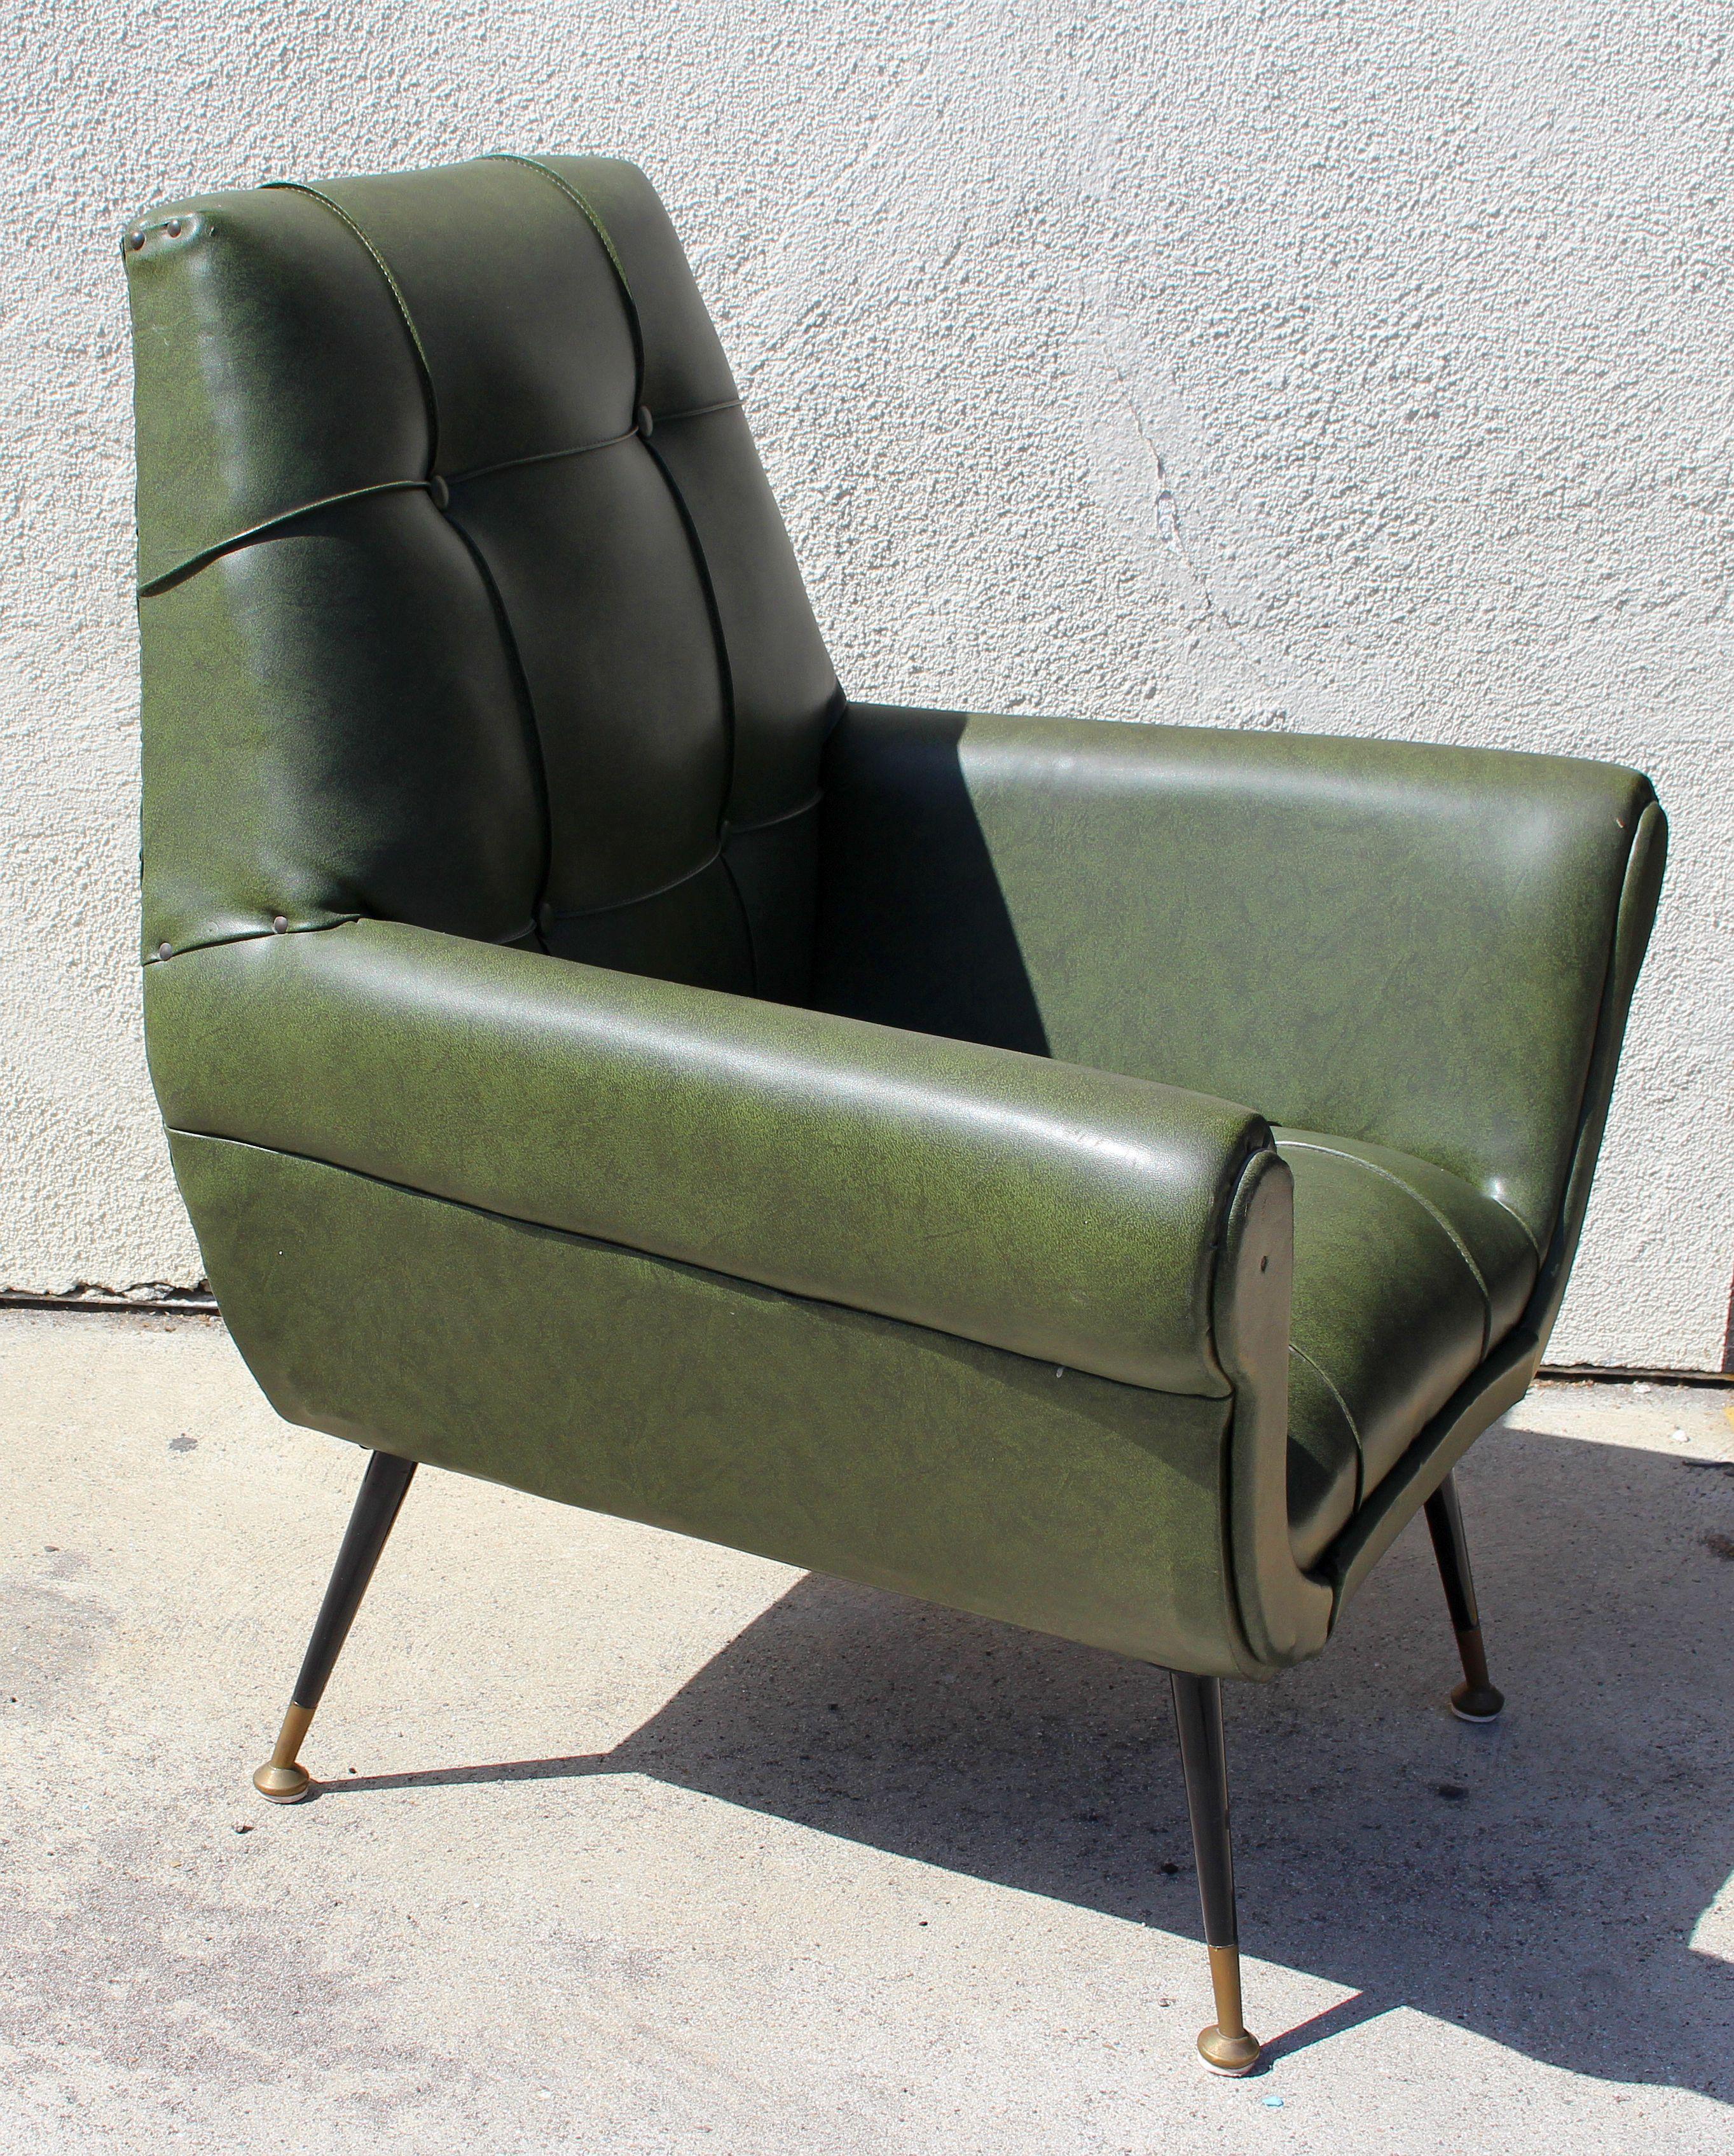 Italin 1950s chair by Gigi Radiche in original material and condition .